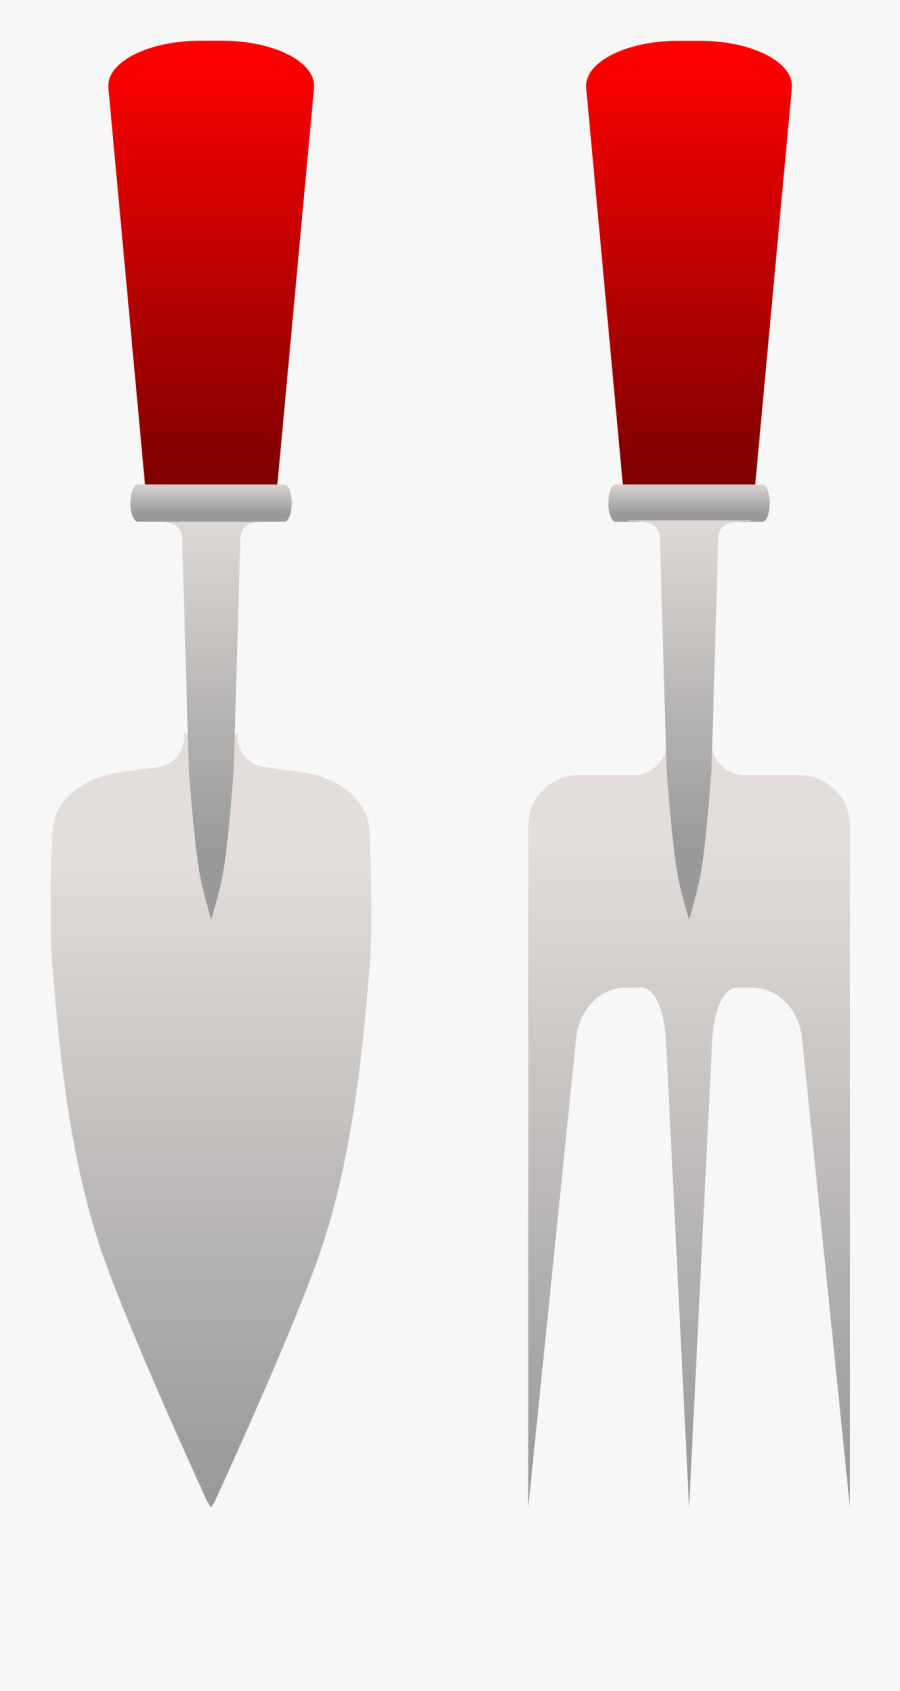 This Free Icons Png Design Of Gardening Fork And Trowel - Illustration, Transparent Clipart